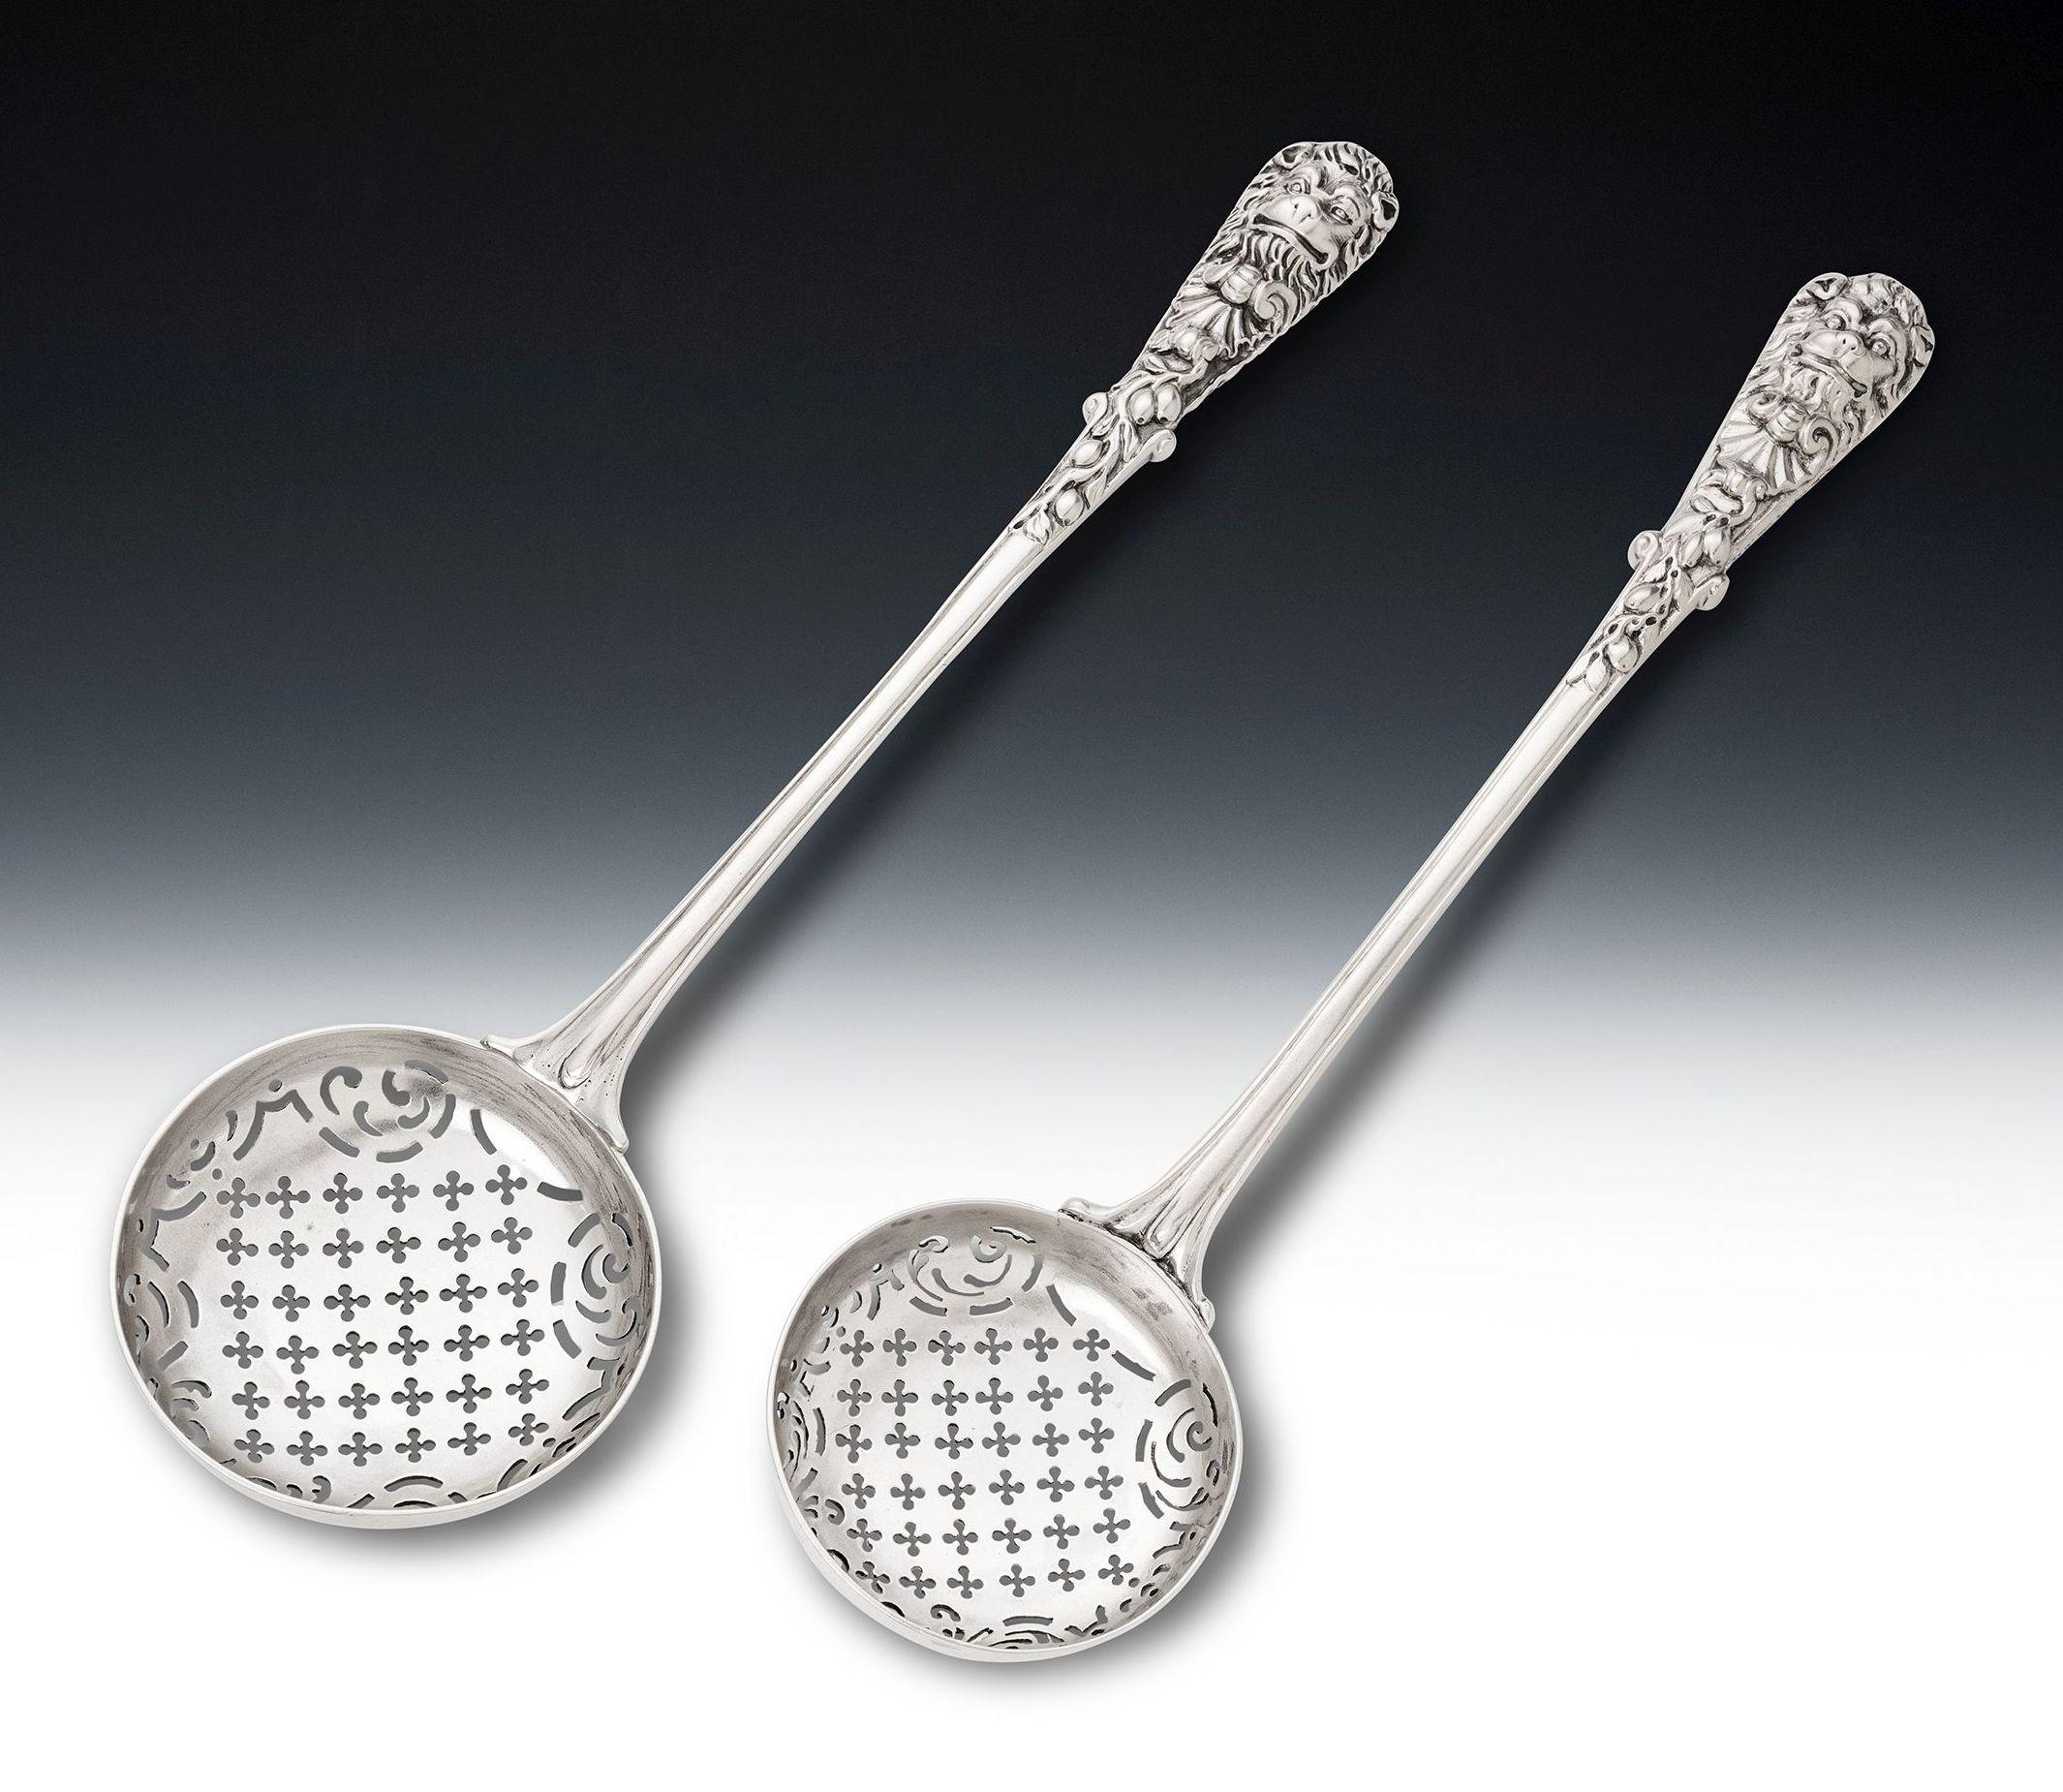 AFTER PAUL DE LAMERIE
A VERY RARE PAIR OF GEORGE II GRADUATED CAST SIFTER SPOONS
UNUSUALLY MODELLED IN A SERVING SPOON SIZE
MADE IN LONDON IN 1754/55 BY WILLIAM CRIPPS

The cast Sifter Spoons are the largest we have ever offered and are modelled in